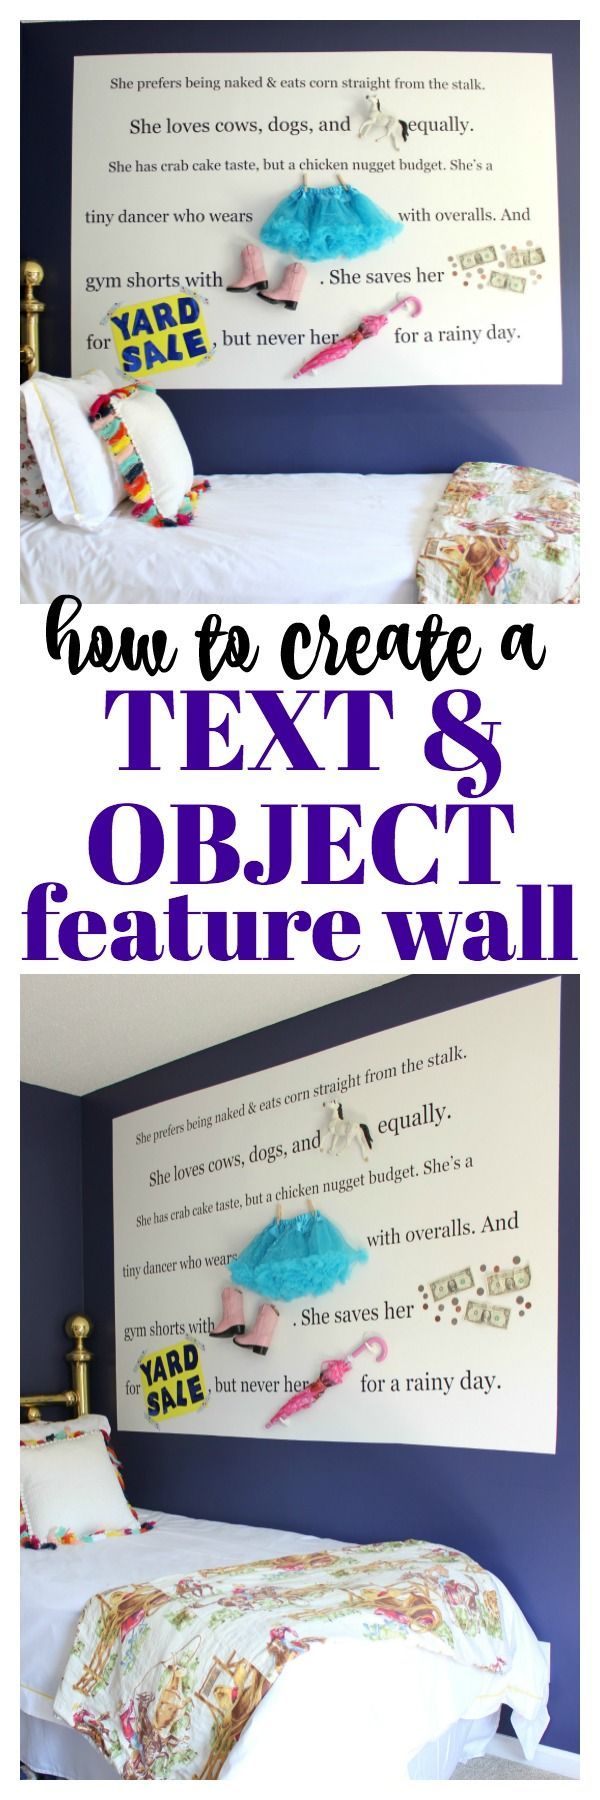 How to Create an Object and Text Feature Wall | Perfect for a kid's room and...